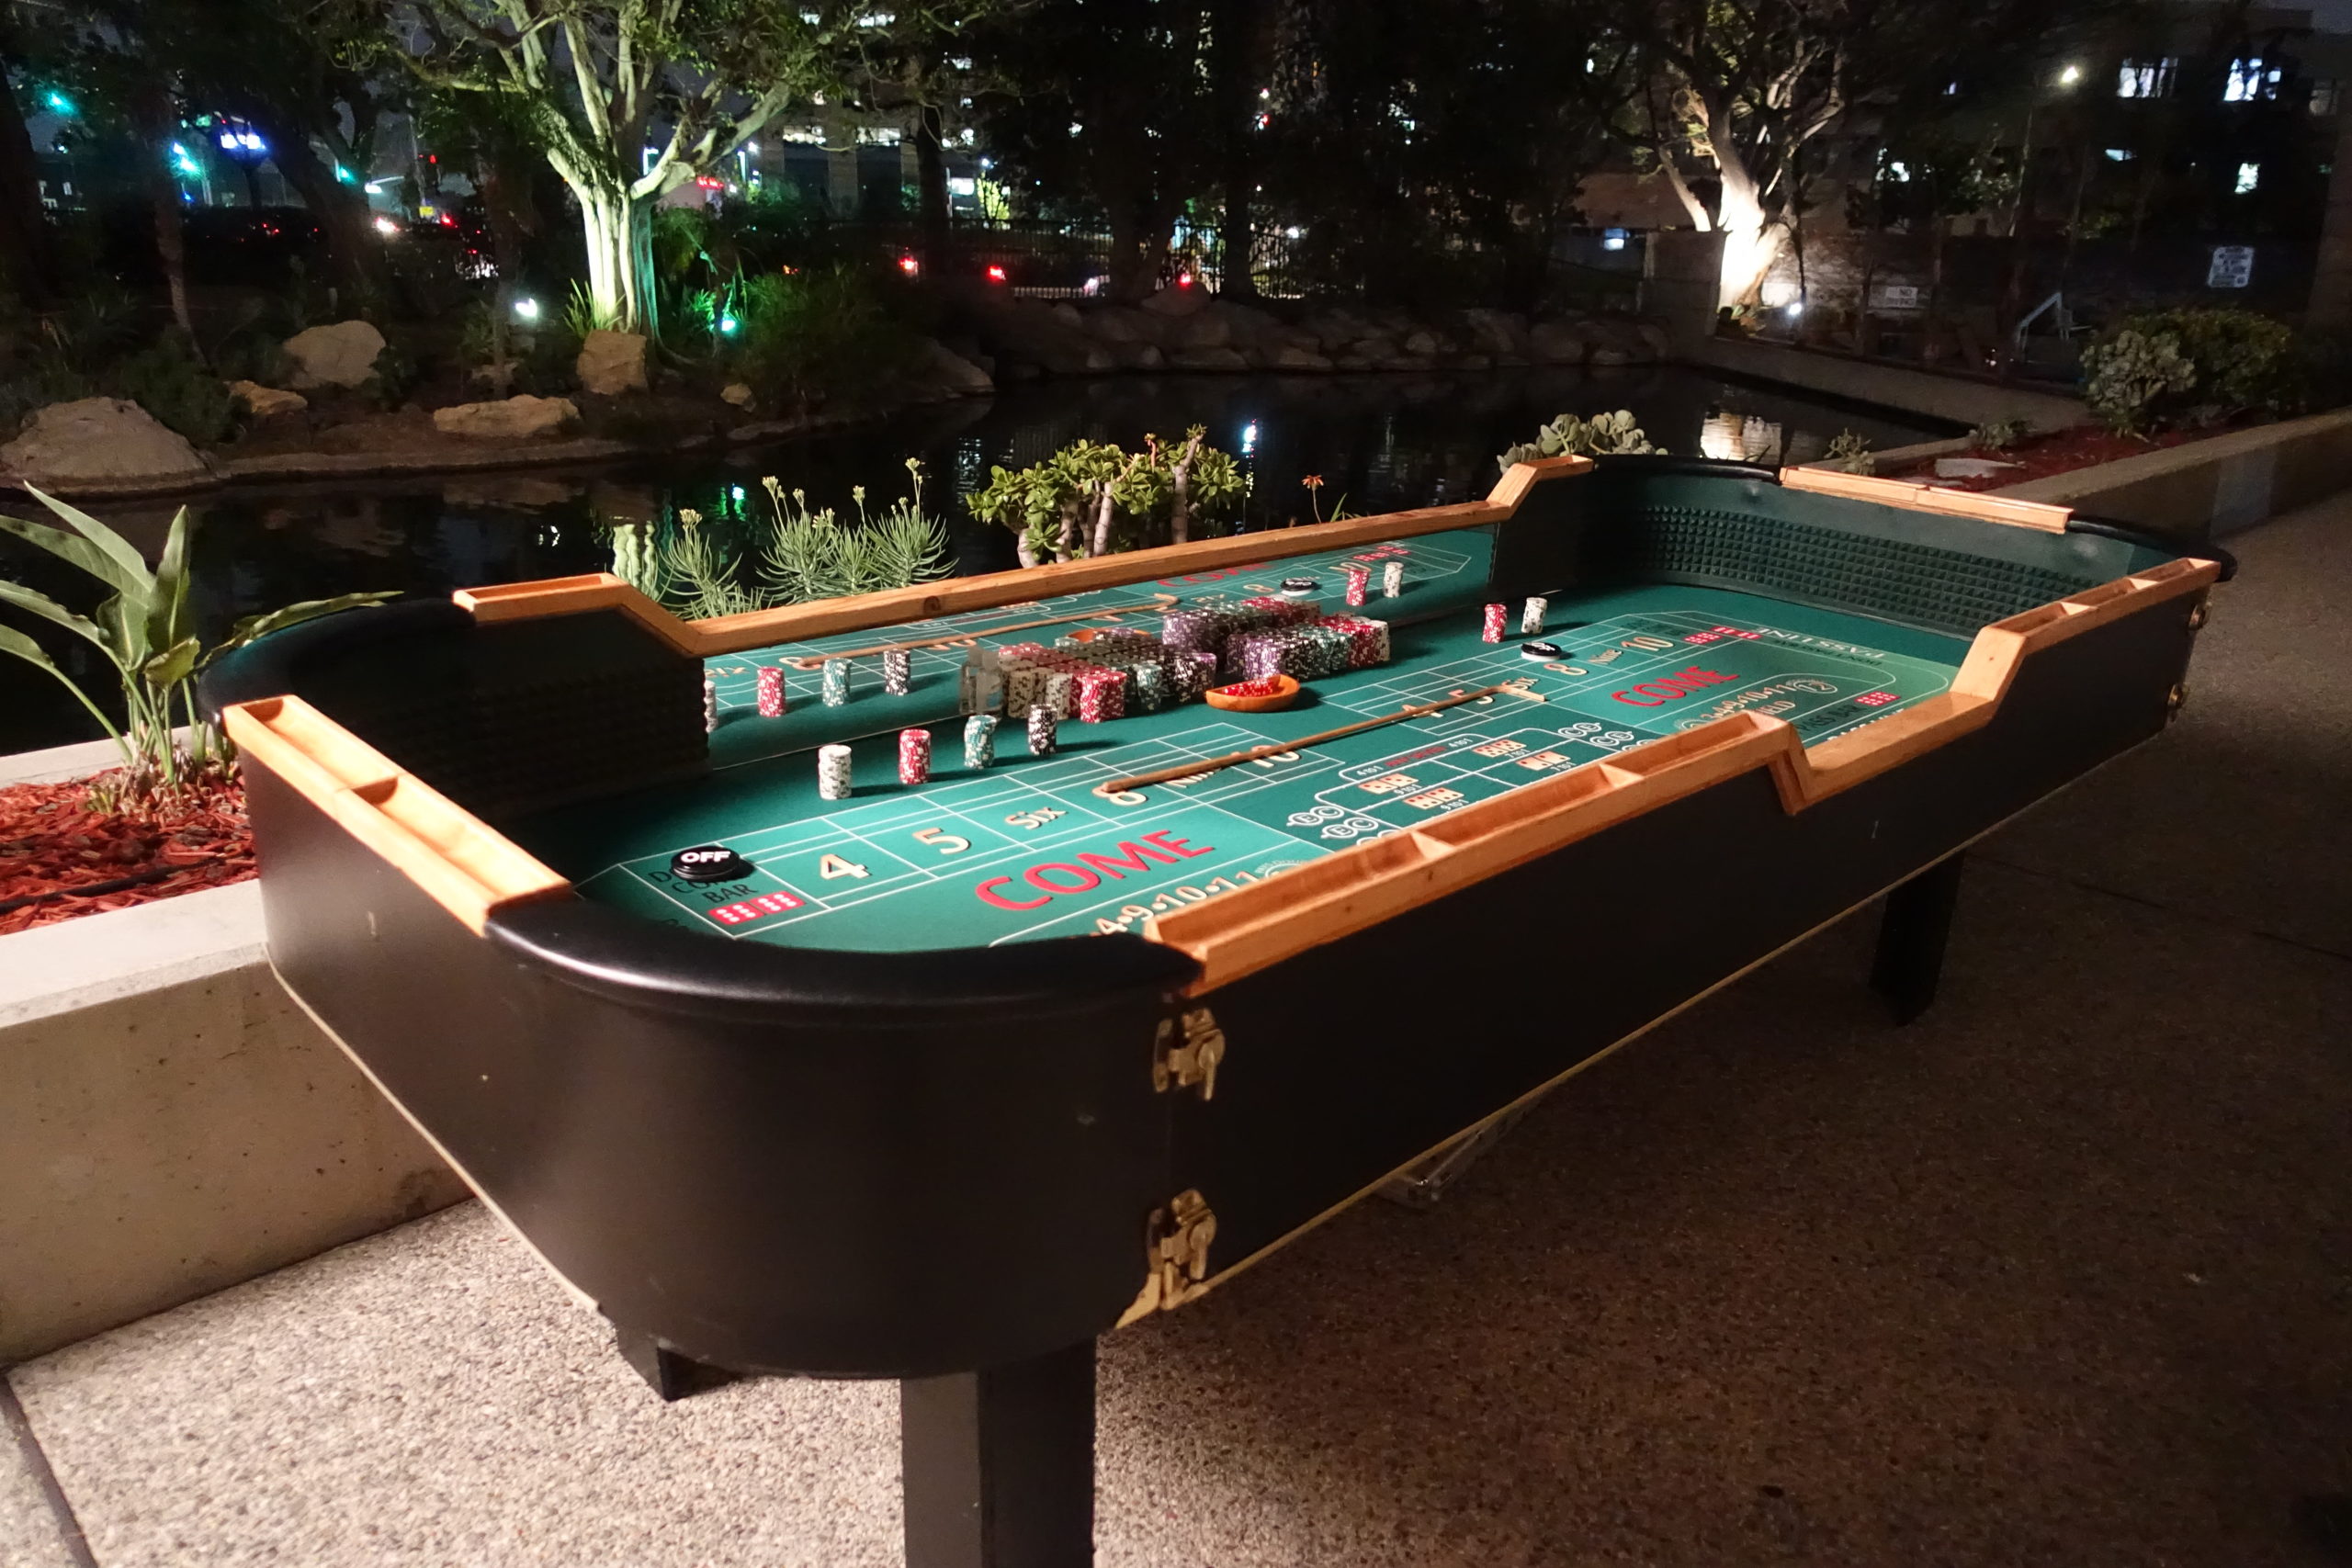 A Craps Table At A Casino-themed Event